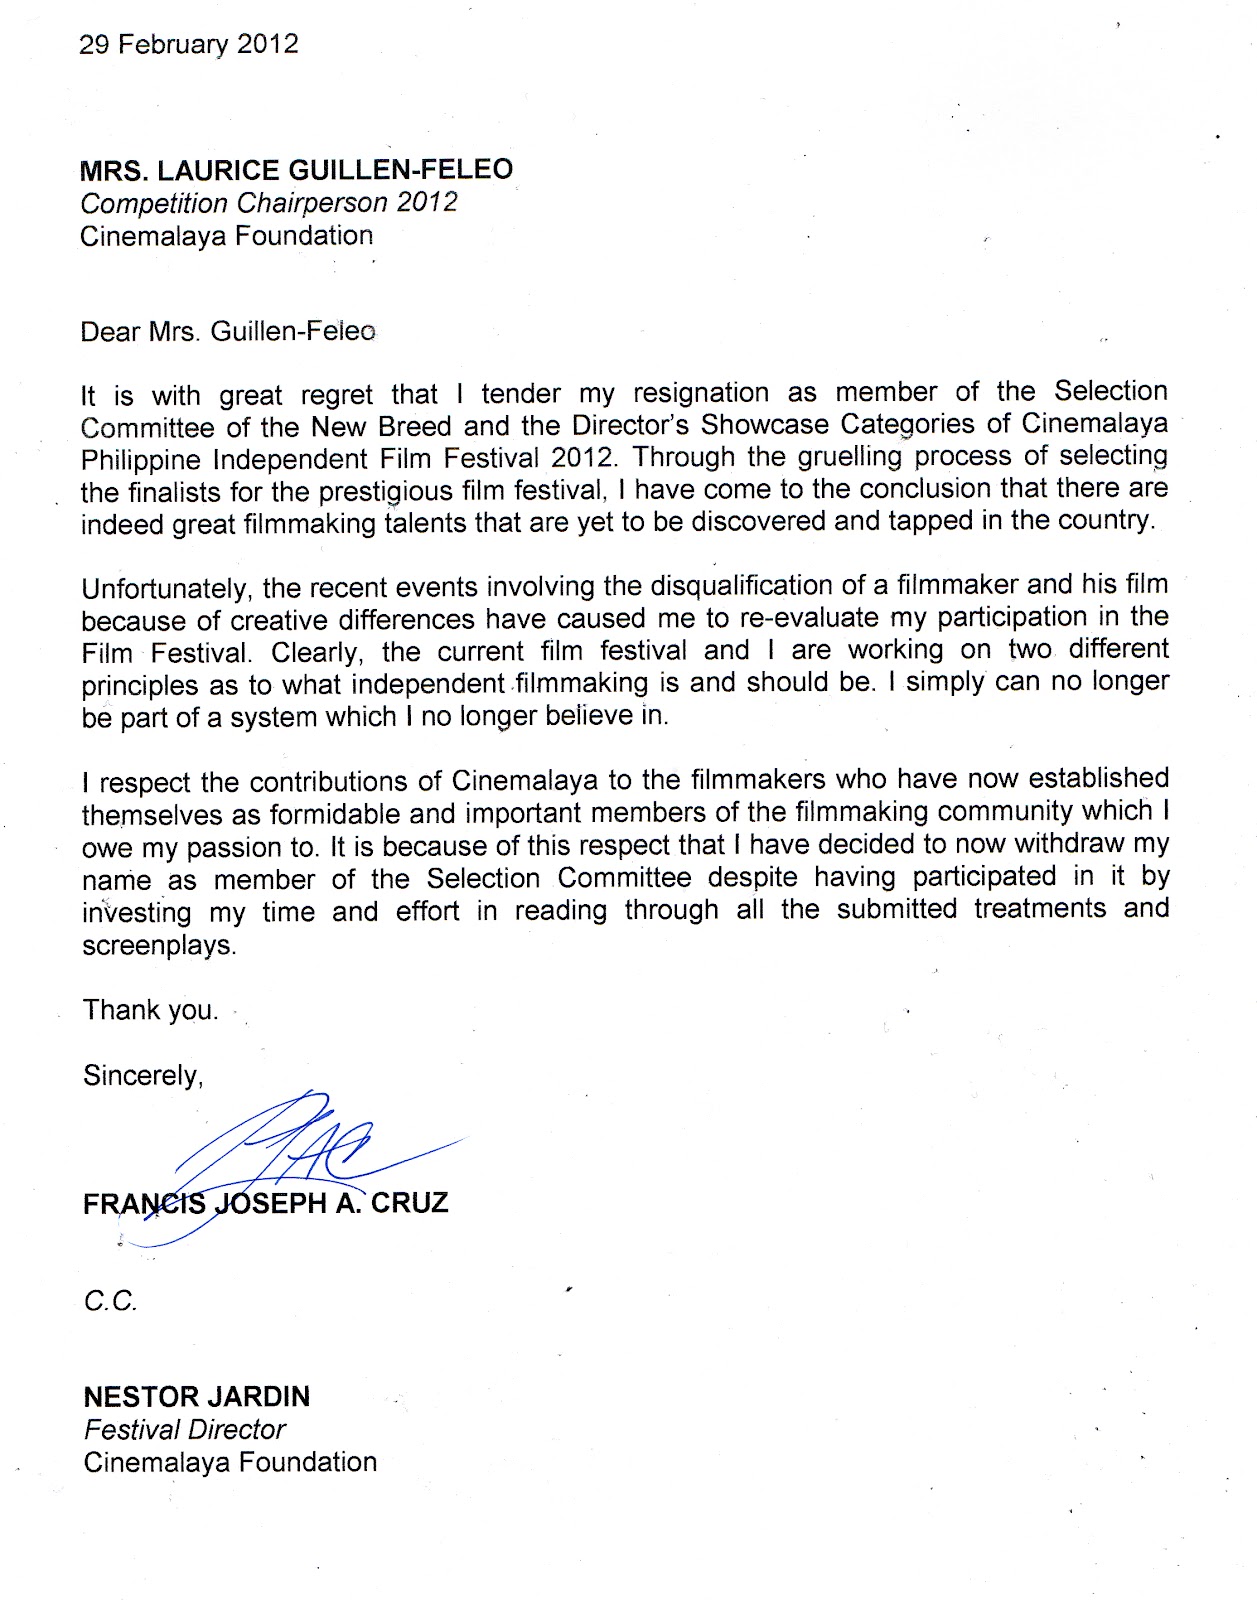 Agreement Letter Between Two Parties